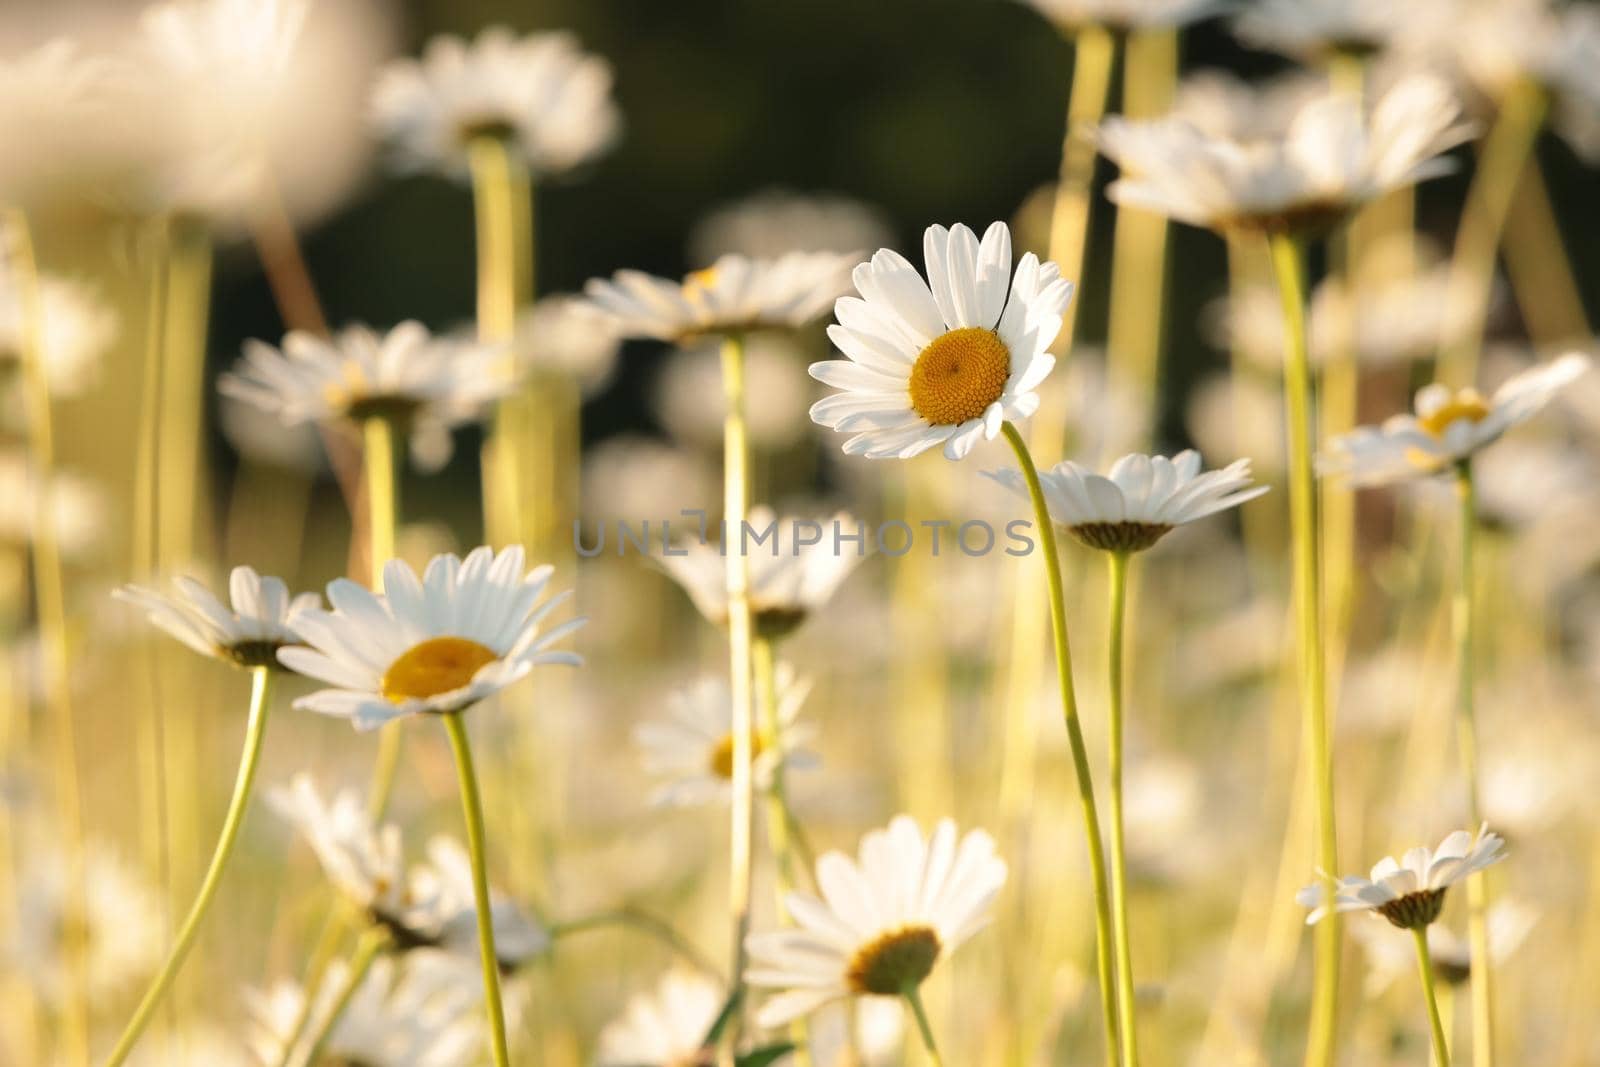 Daisies on a spring meadow at dawn.